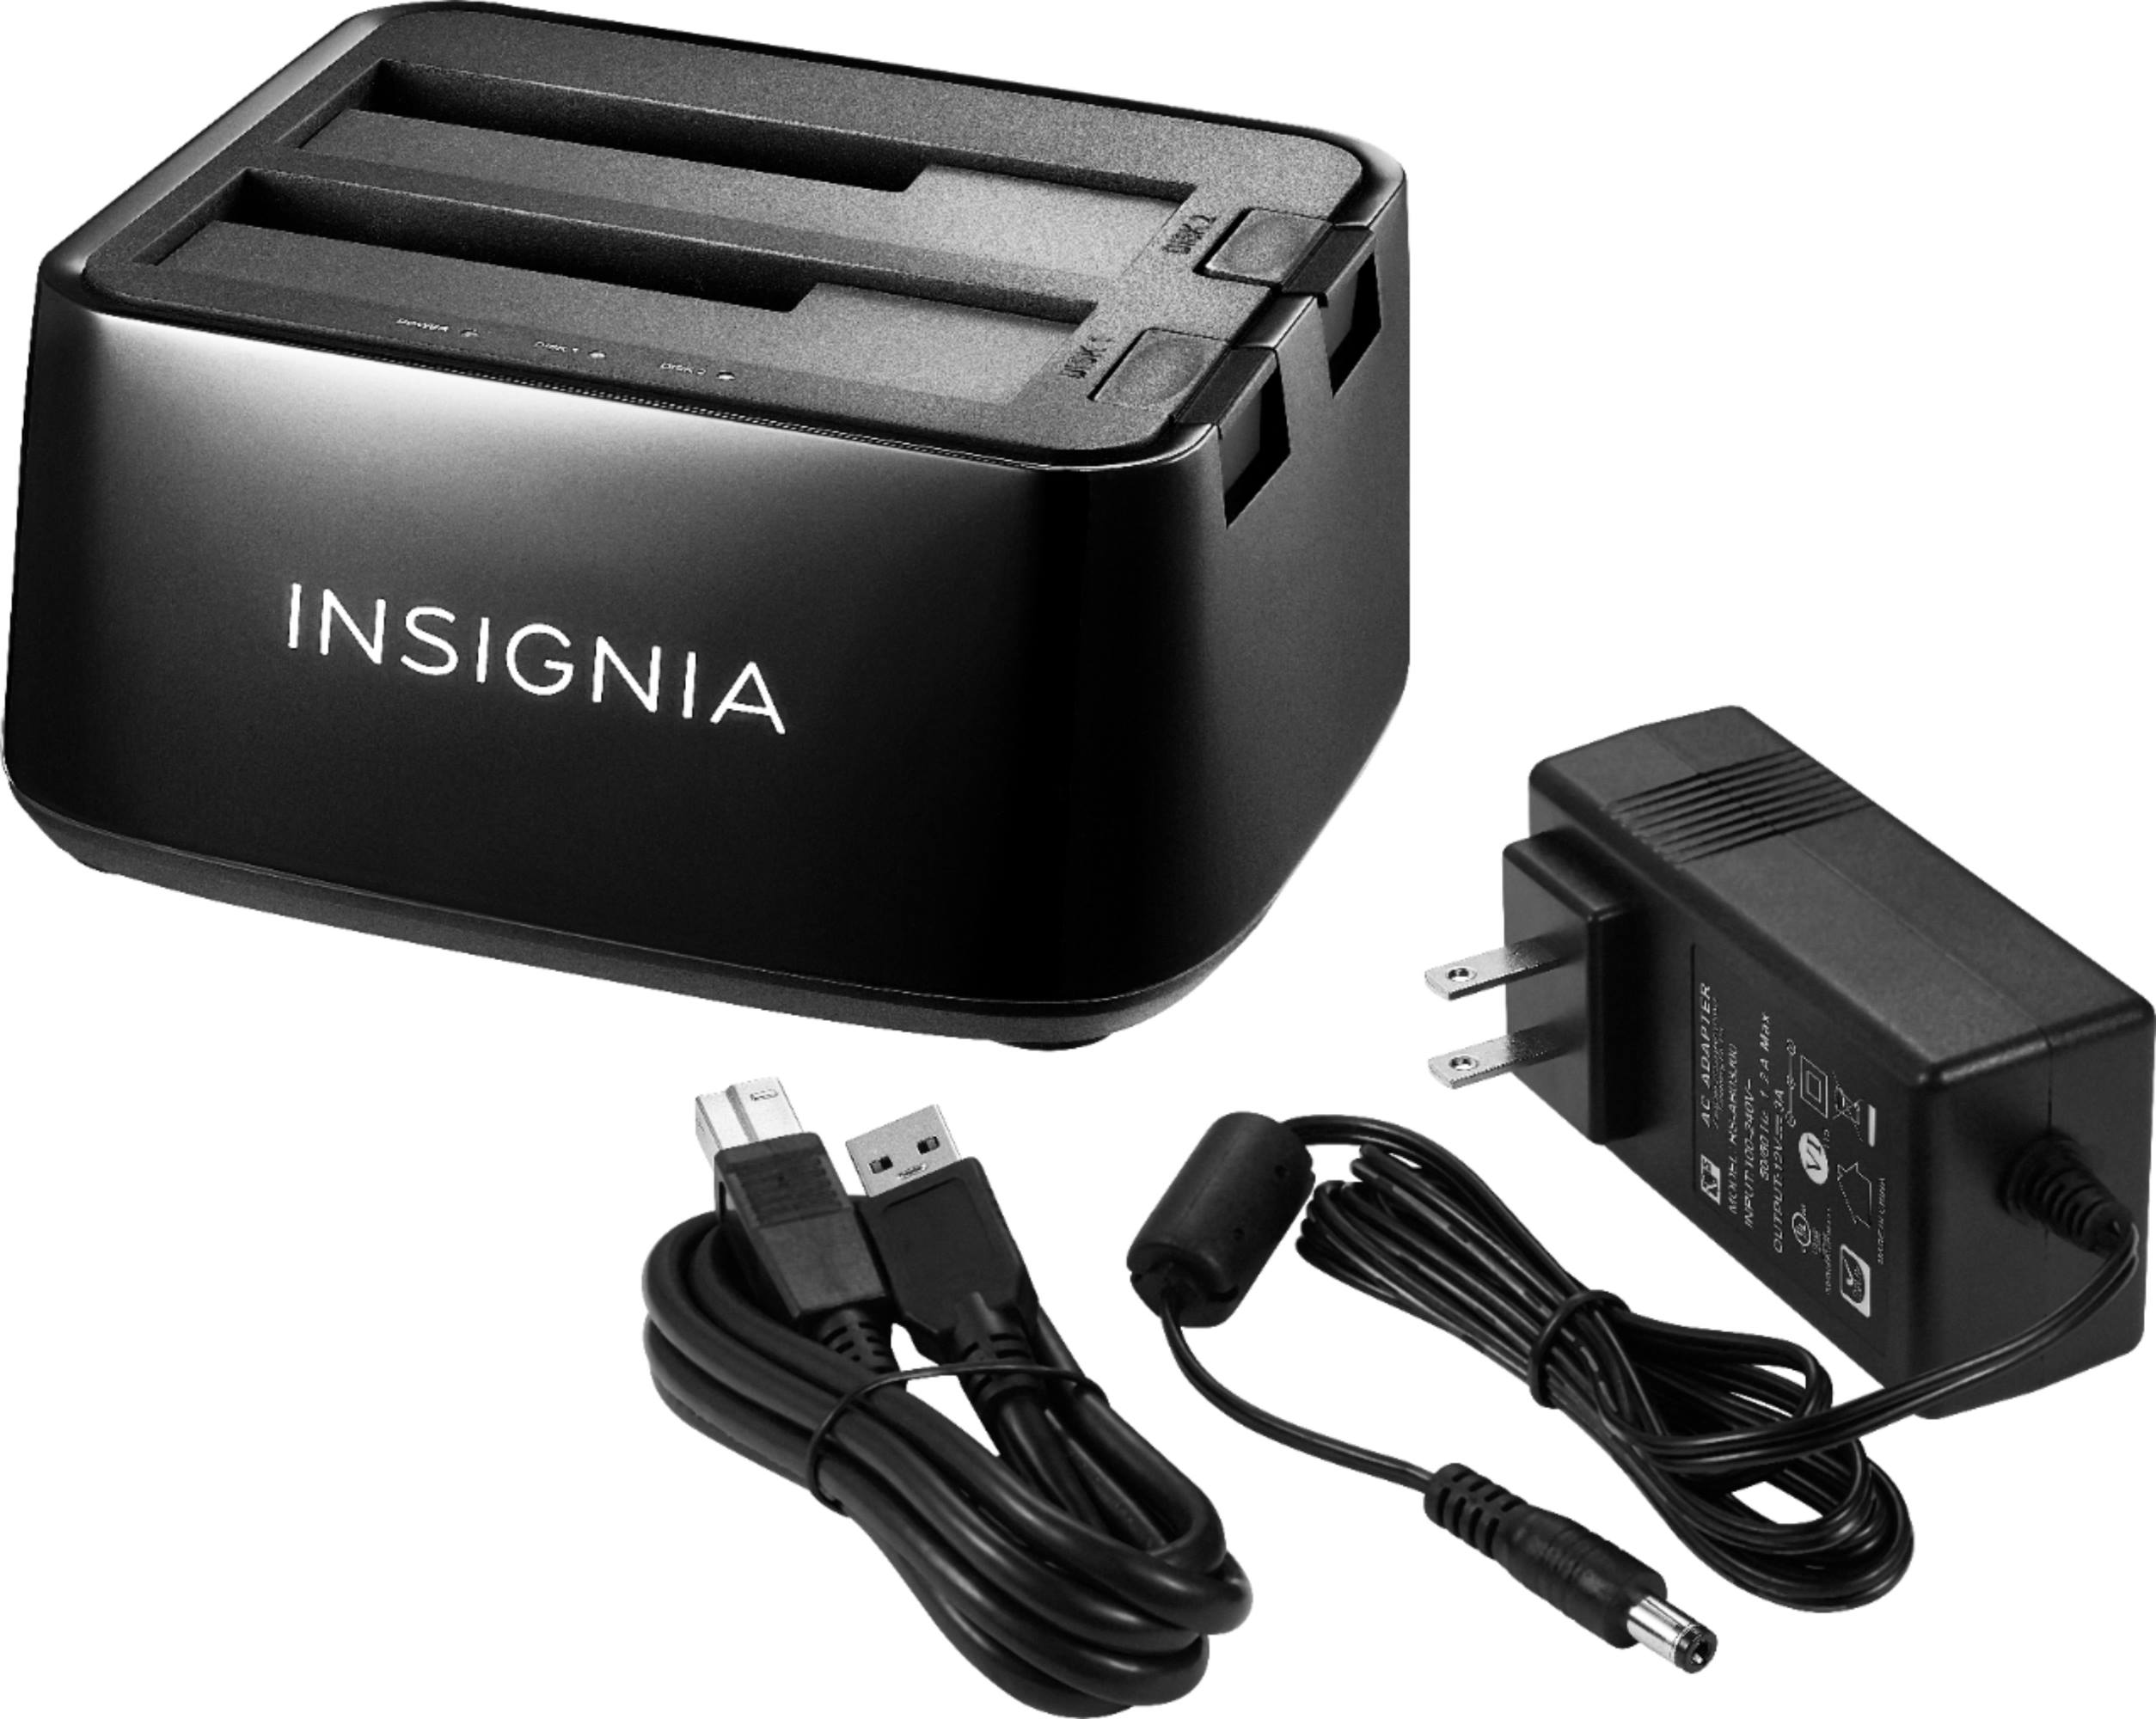 Retrieving Output From Insignia Dual Hard Drive Docking Station To Your Computer